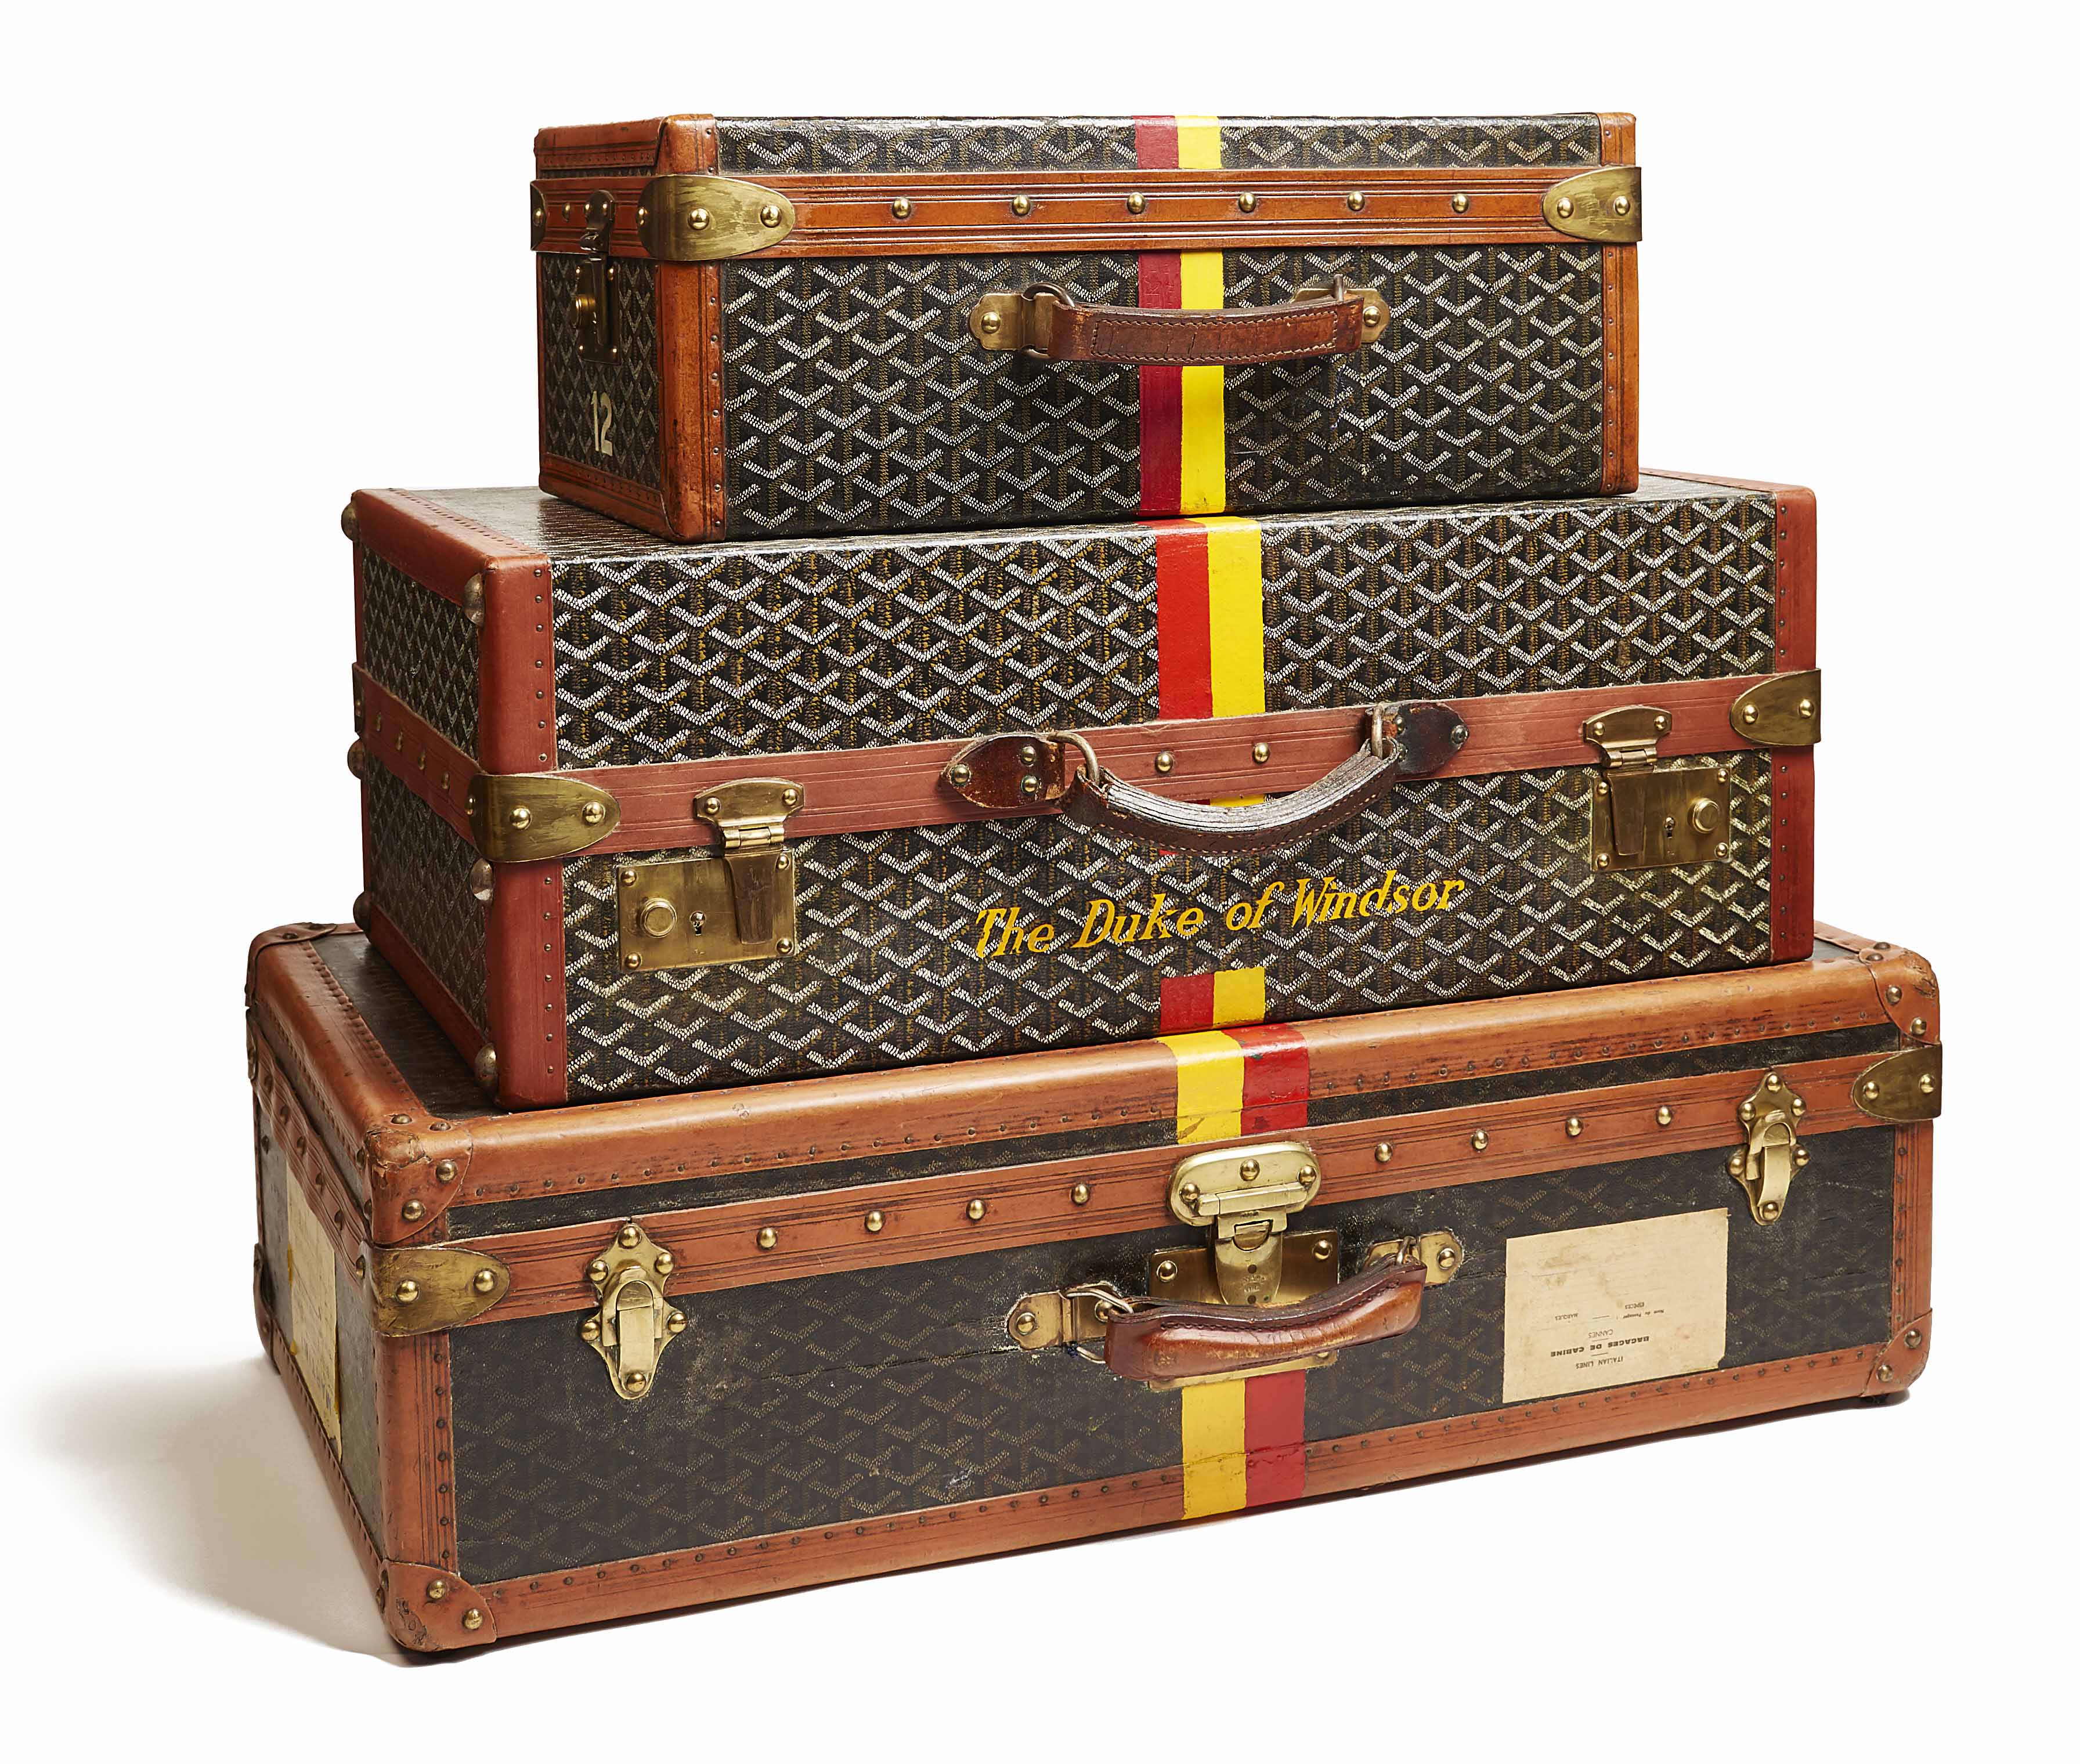 Louis Vuitton Trunk in First Class Luggage on Titanic